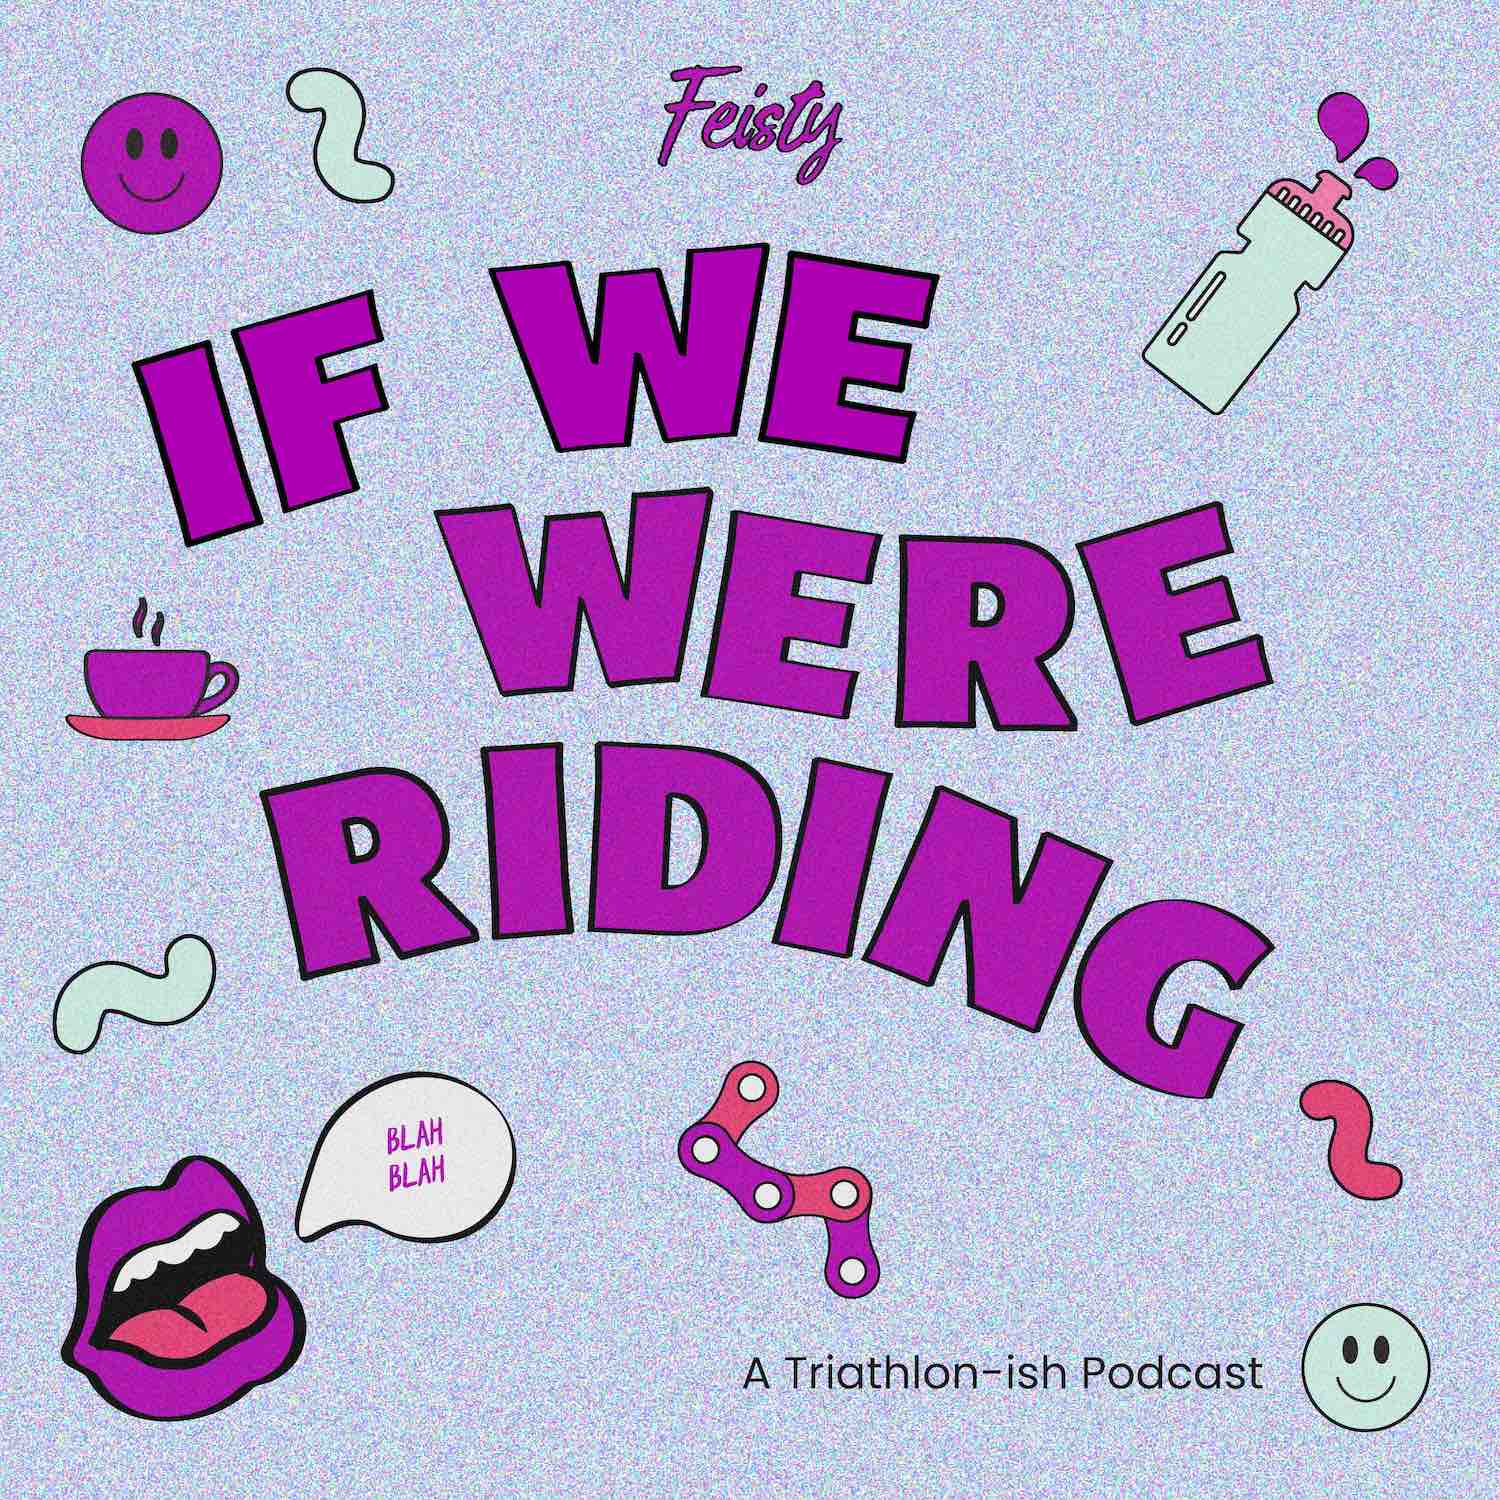 Artwork for podcast If We Were Riding